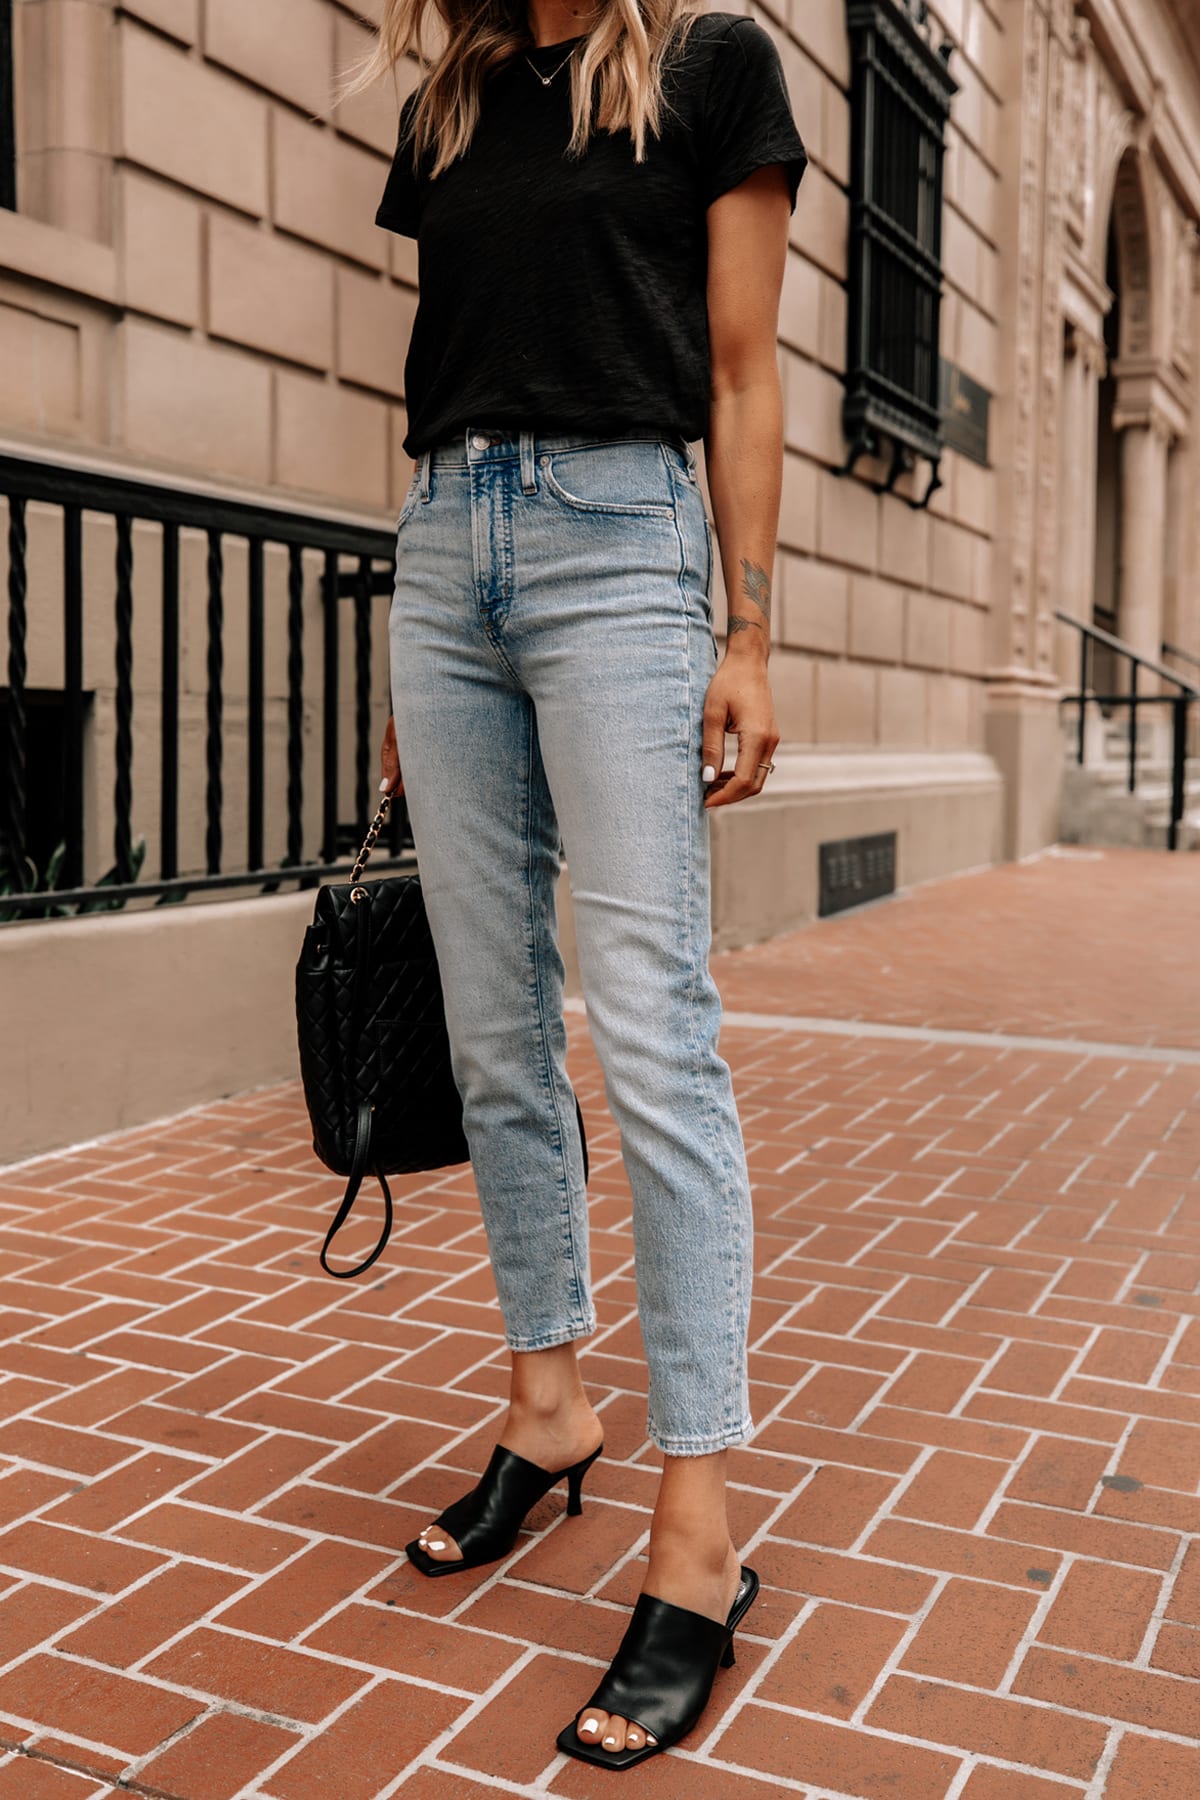 Style With Jeans